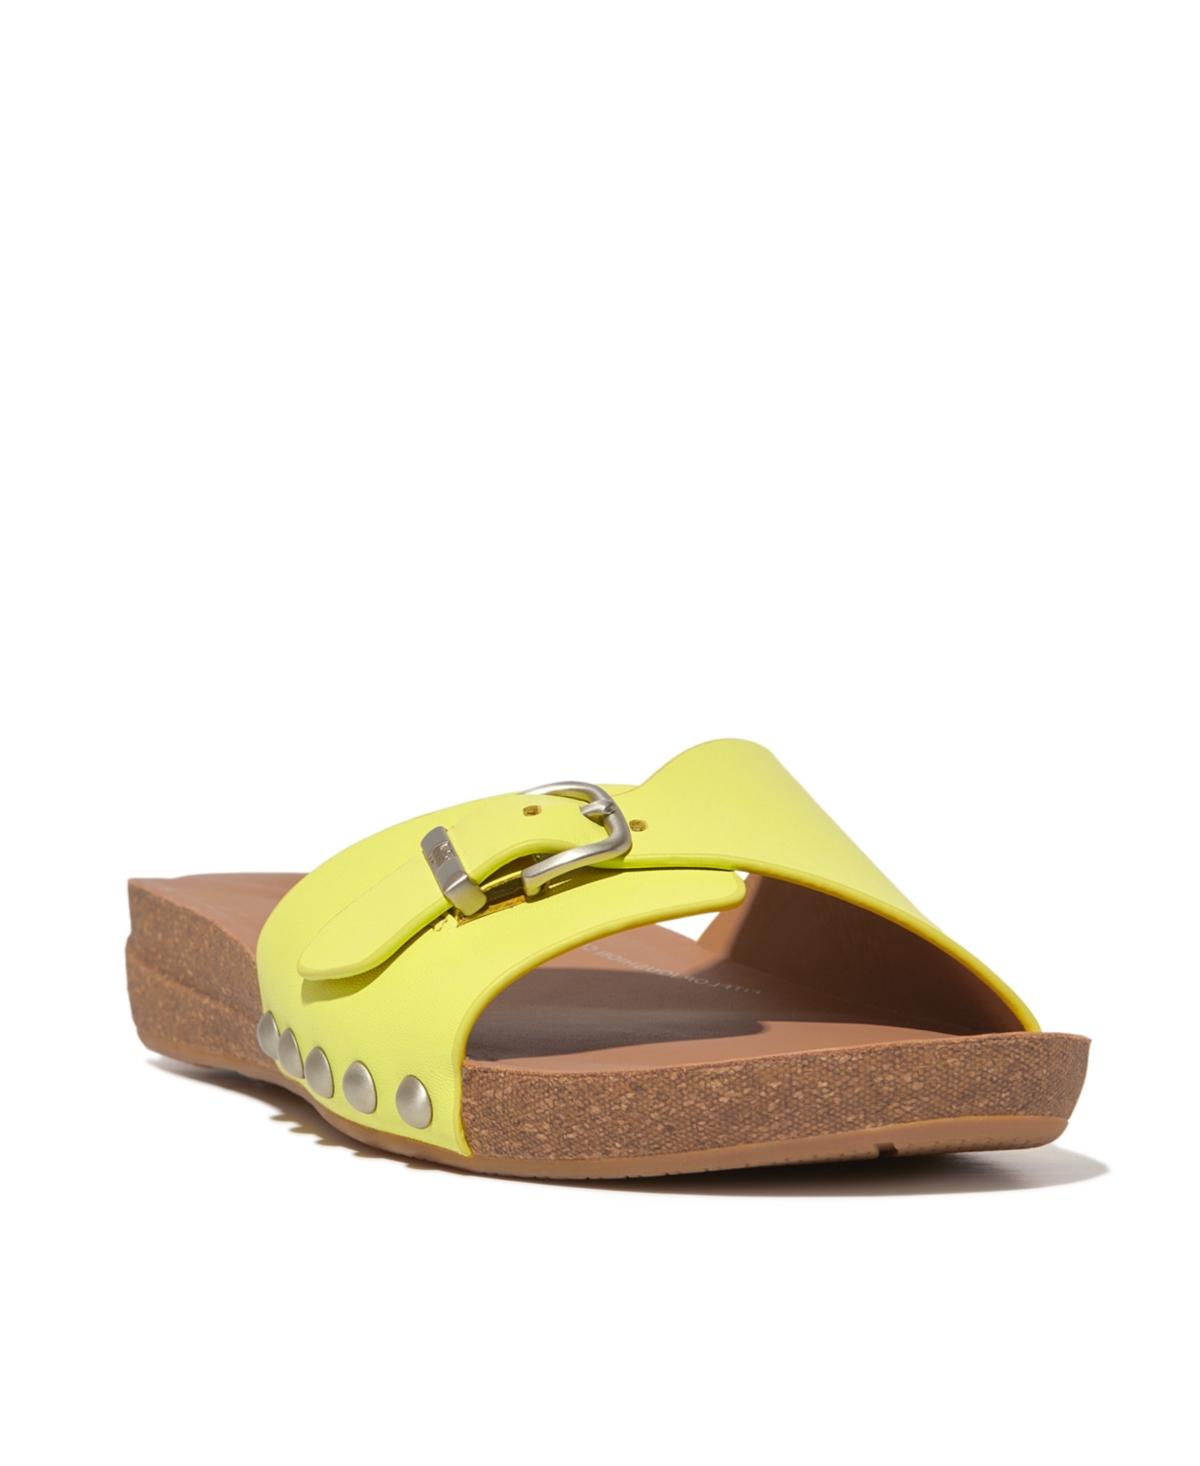 Fitfop Women's Iqushion Adjustable Buckle Metallic-Leather Slides - Sunny Lime